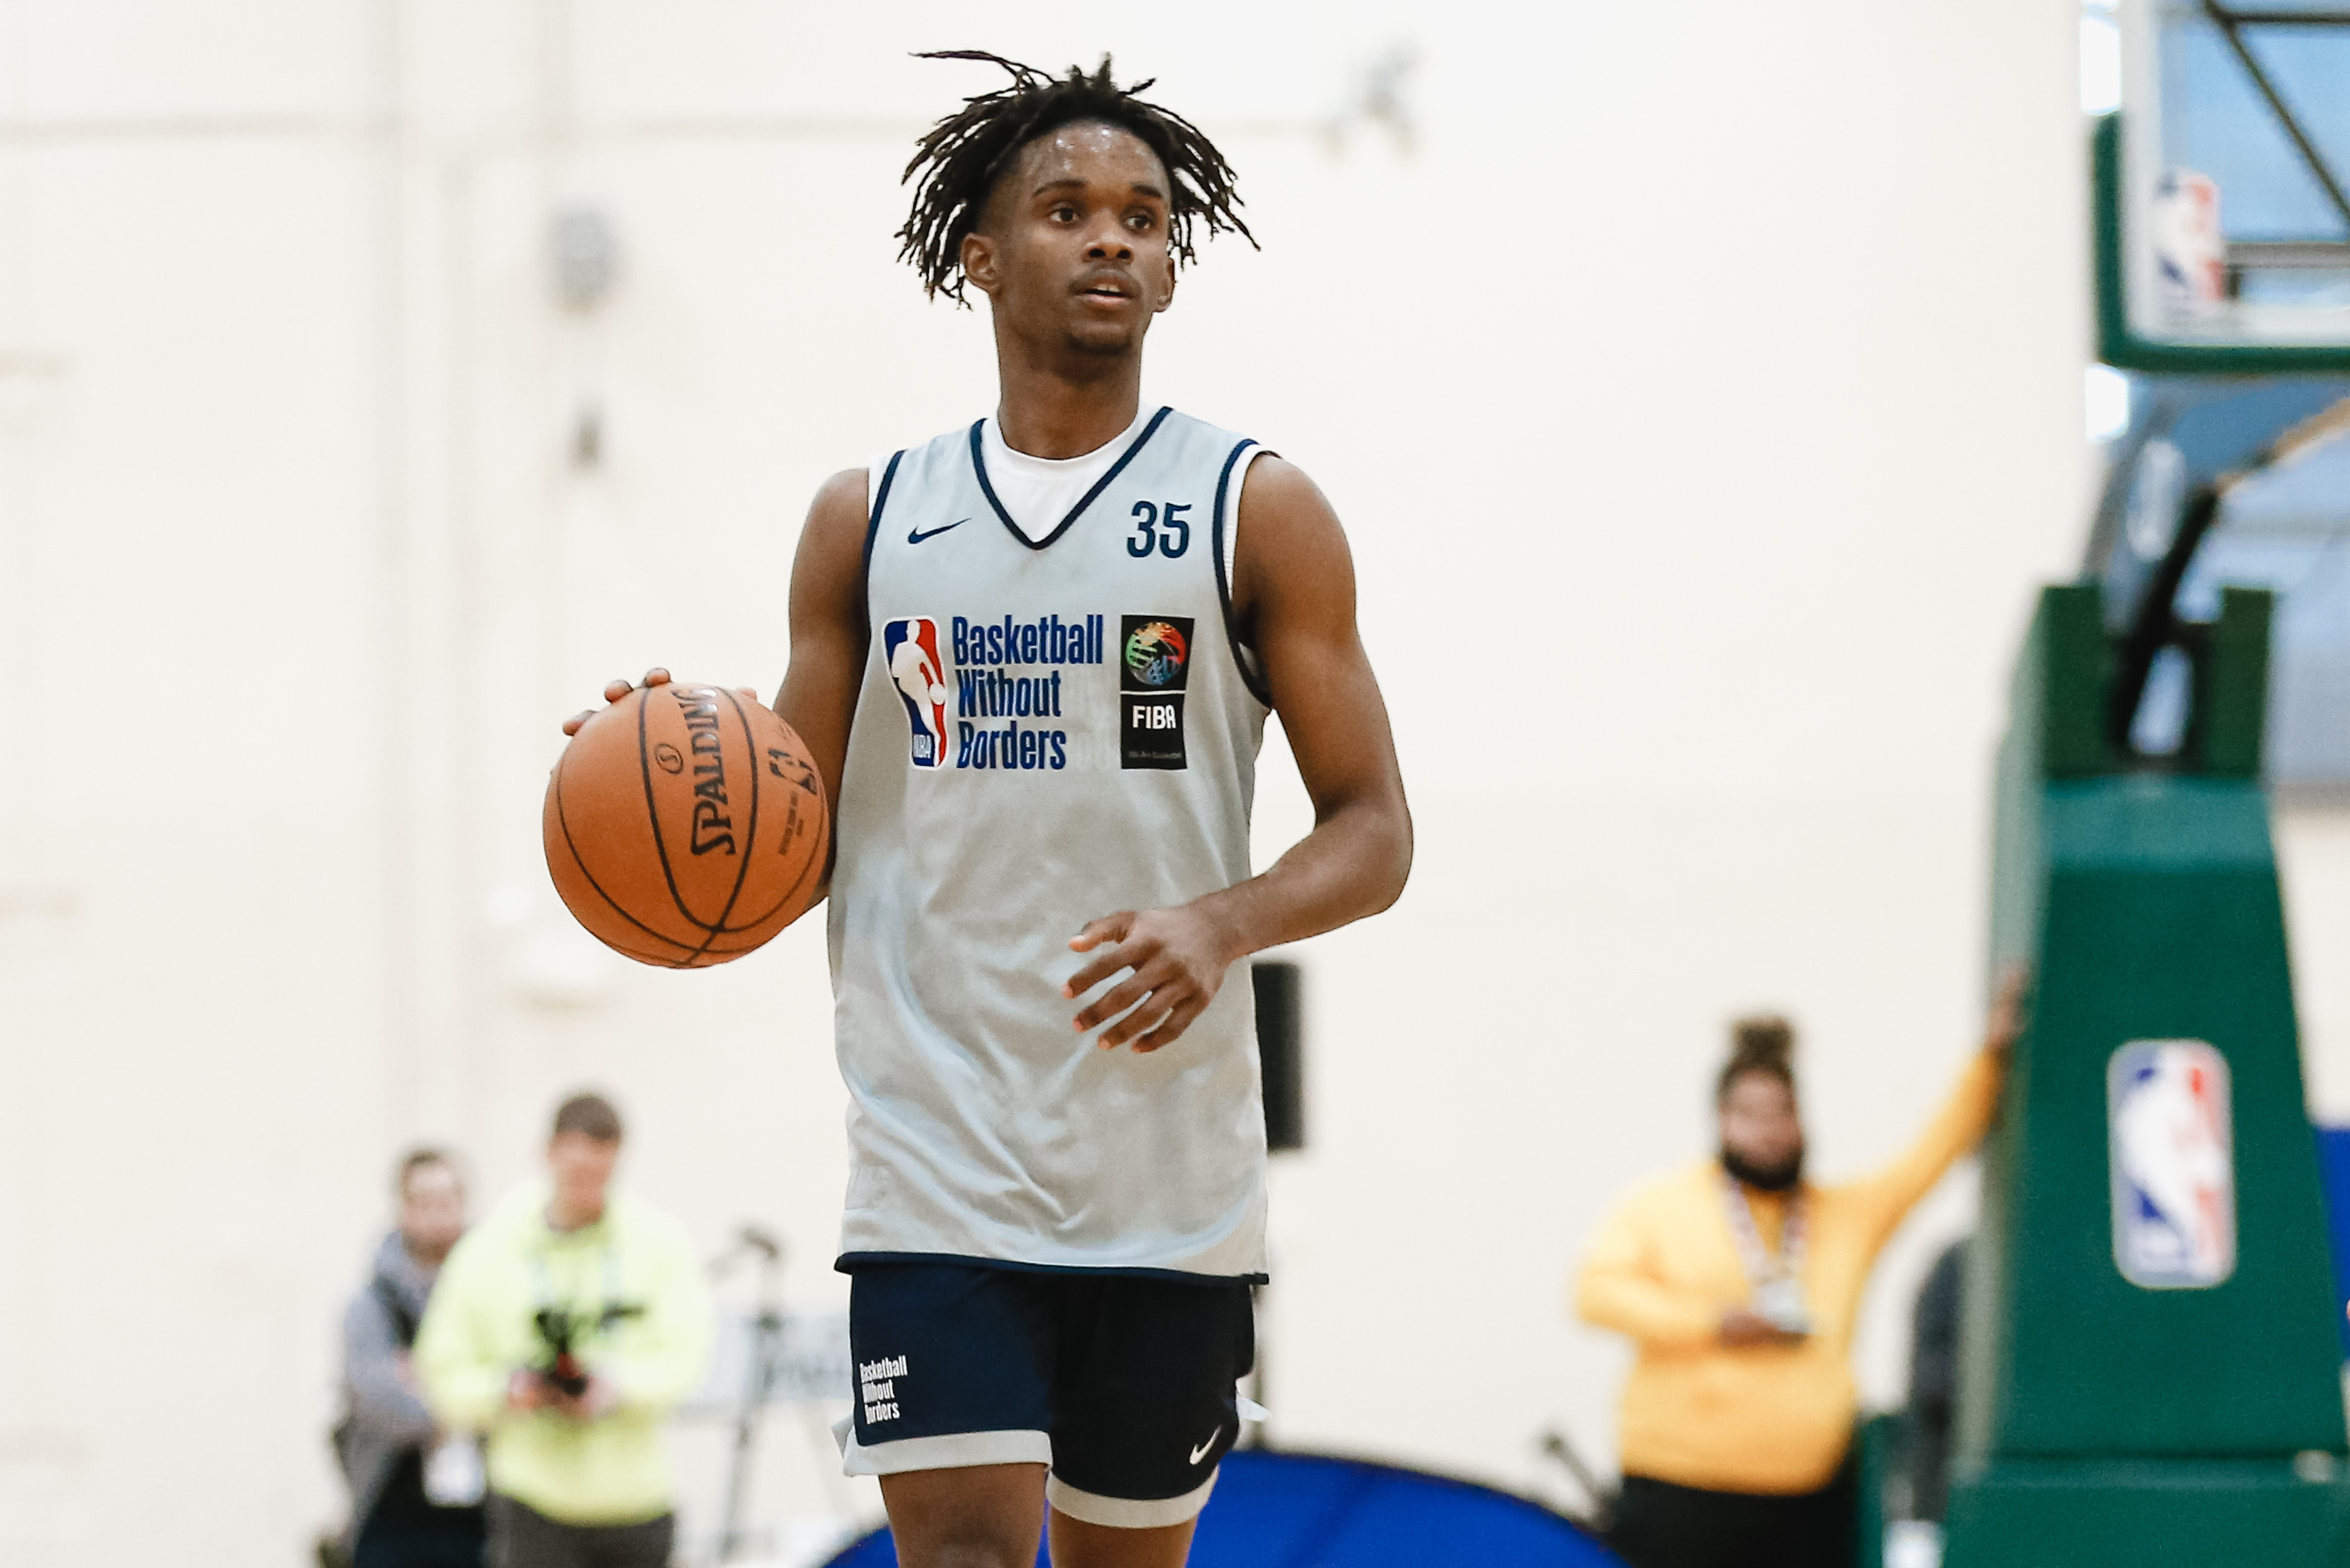 NBA Draft 2021: 5 observations from the G-League Elite Camp - Page 2